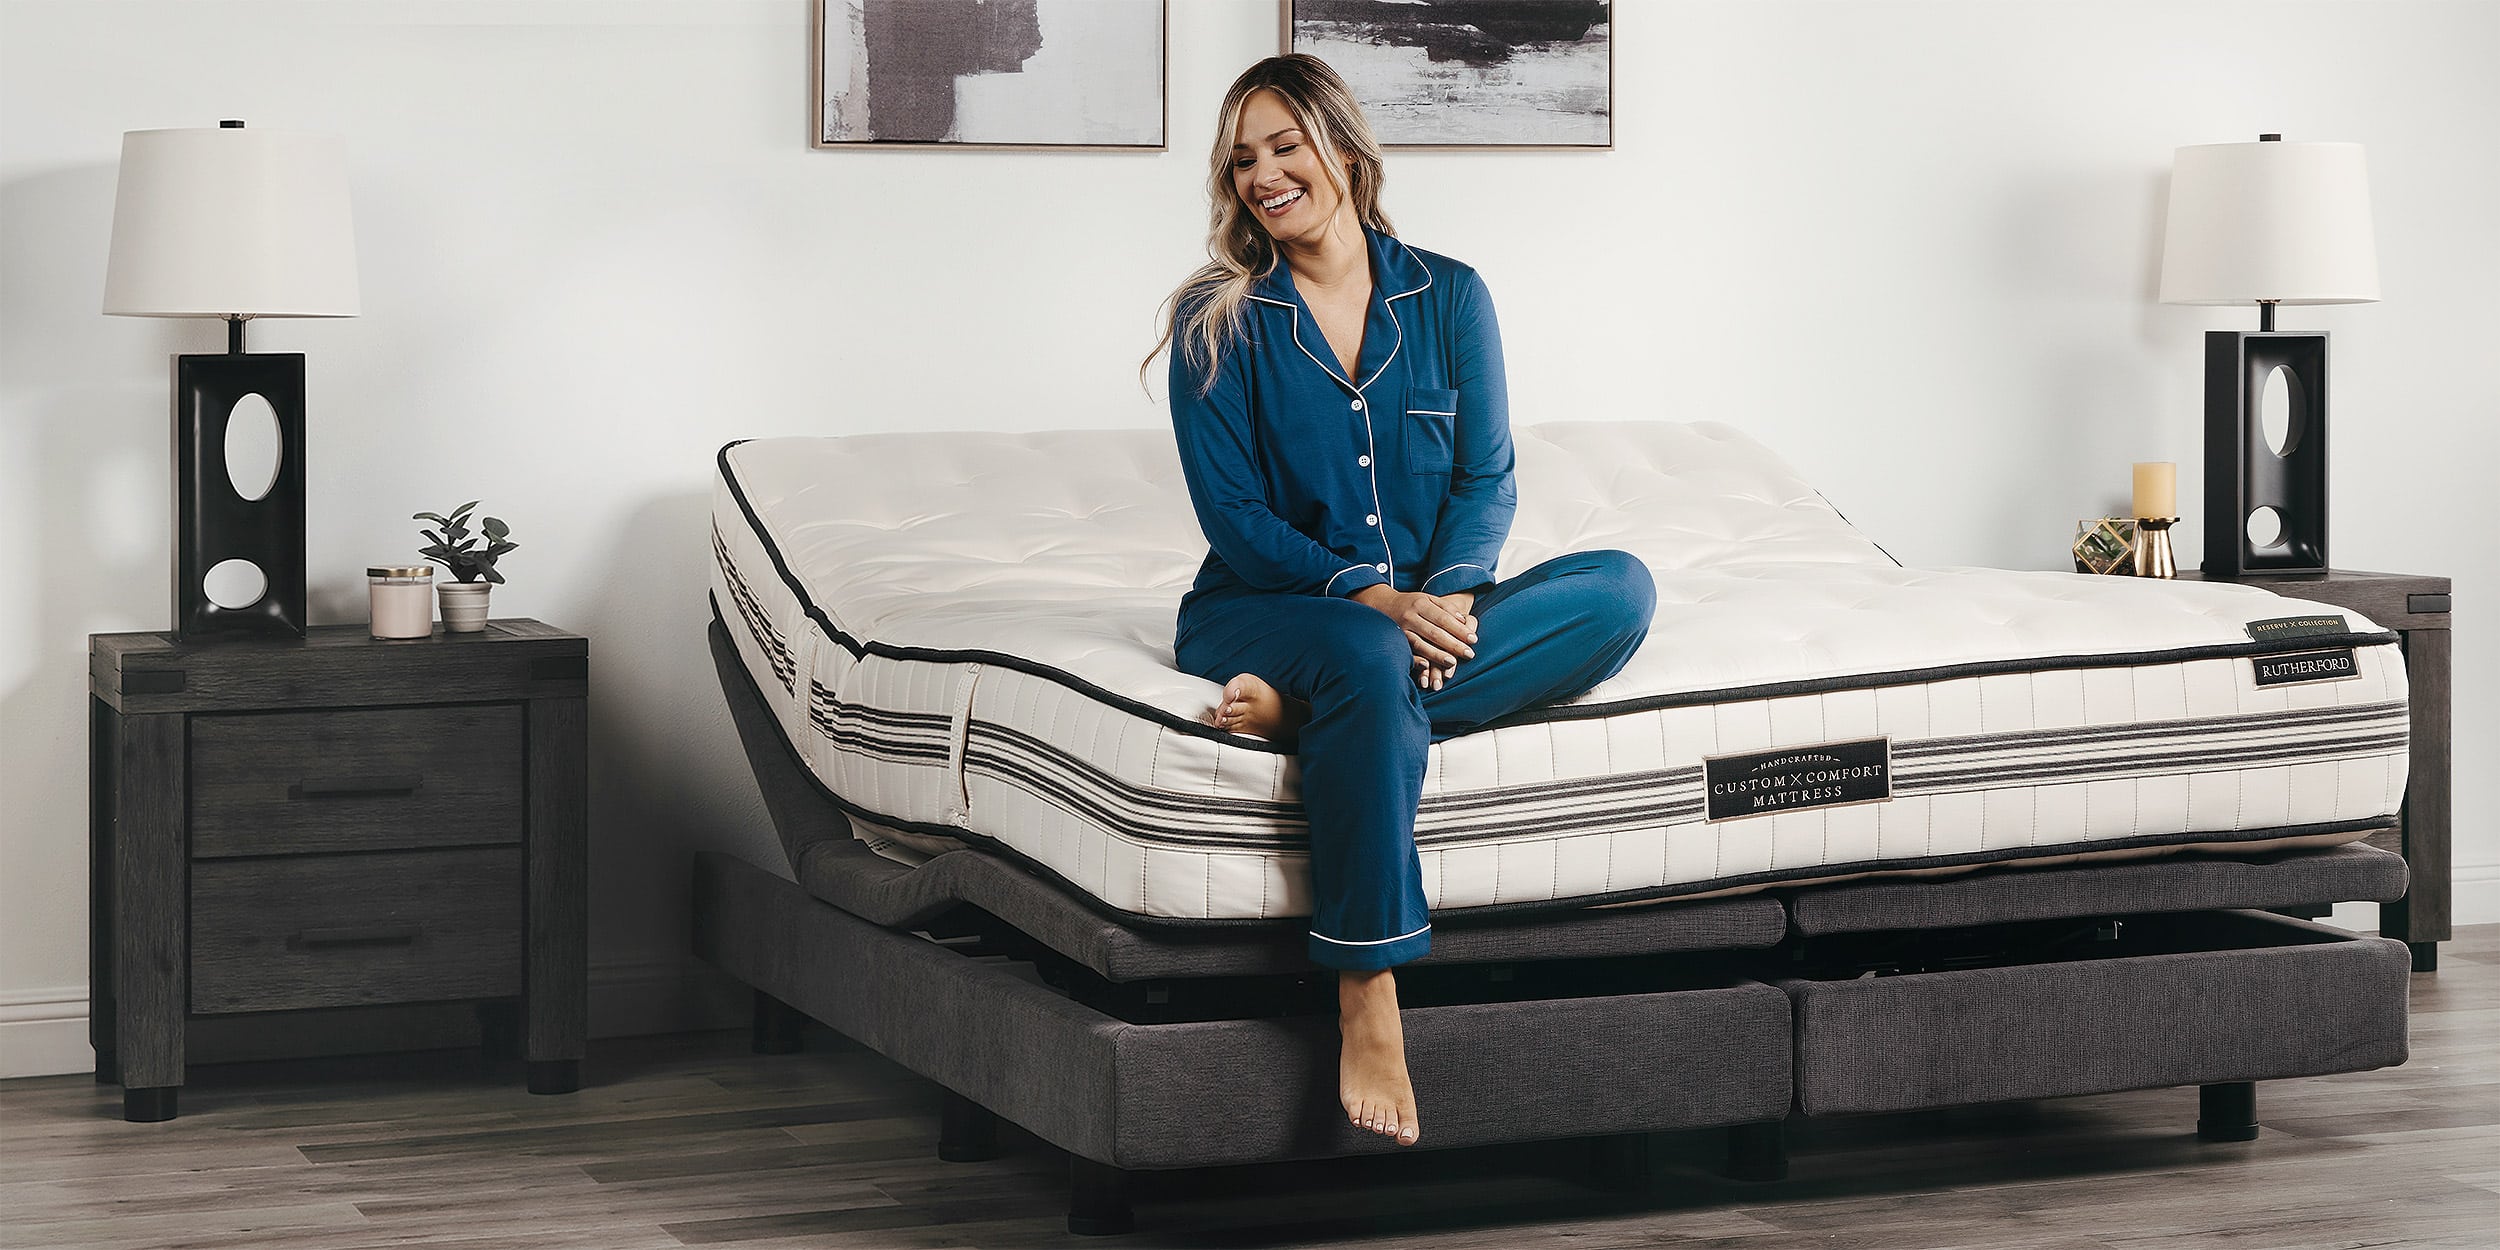 Superior Sleep Experience – Committed to providing the best comfort and  sleep possible on adjustable beds and quality sheets and bedding